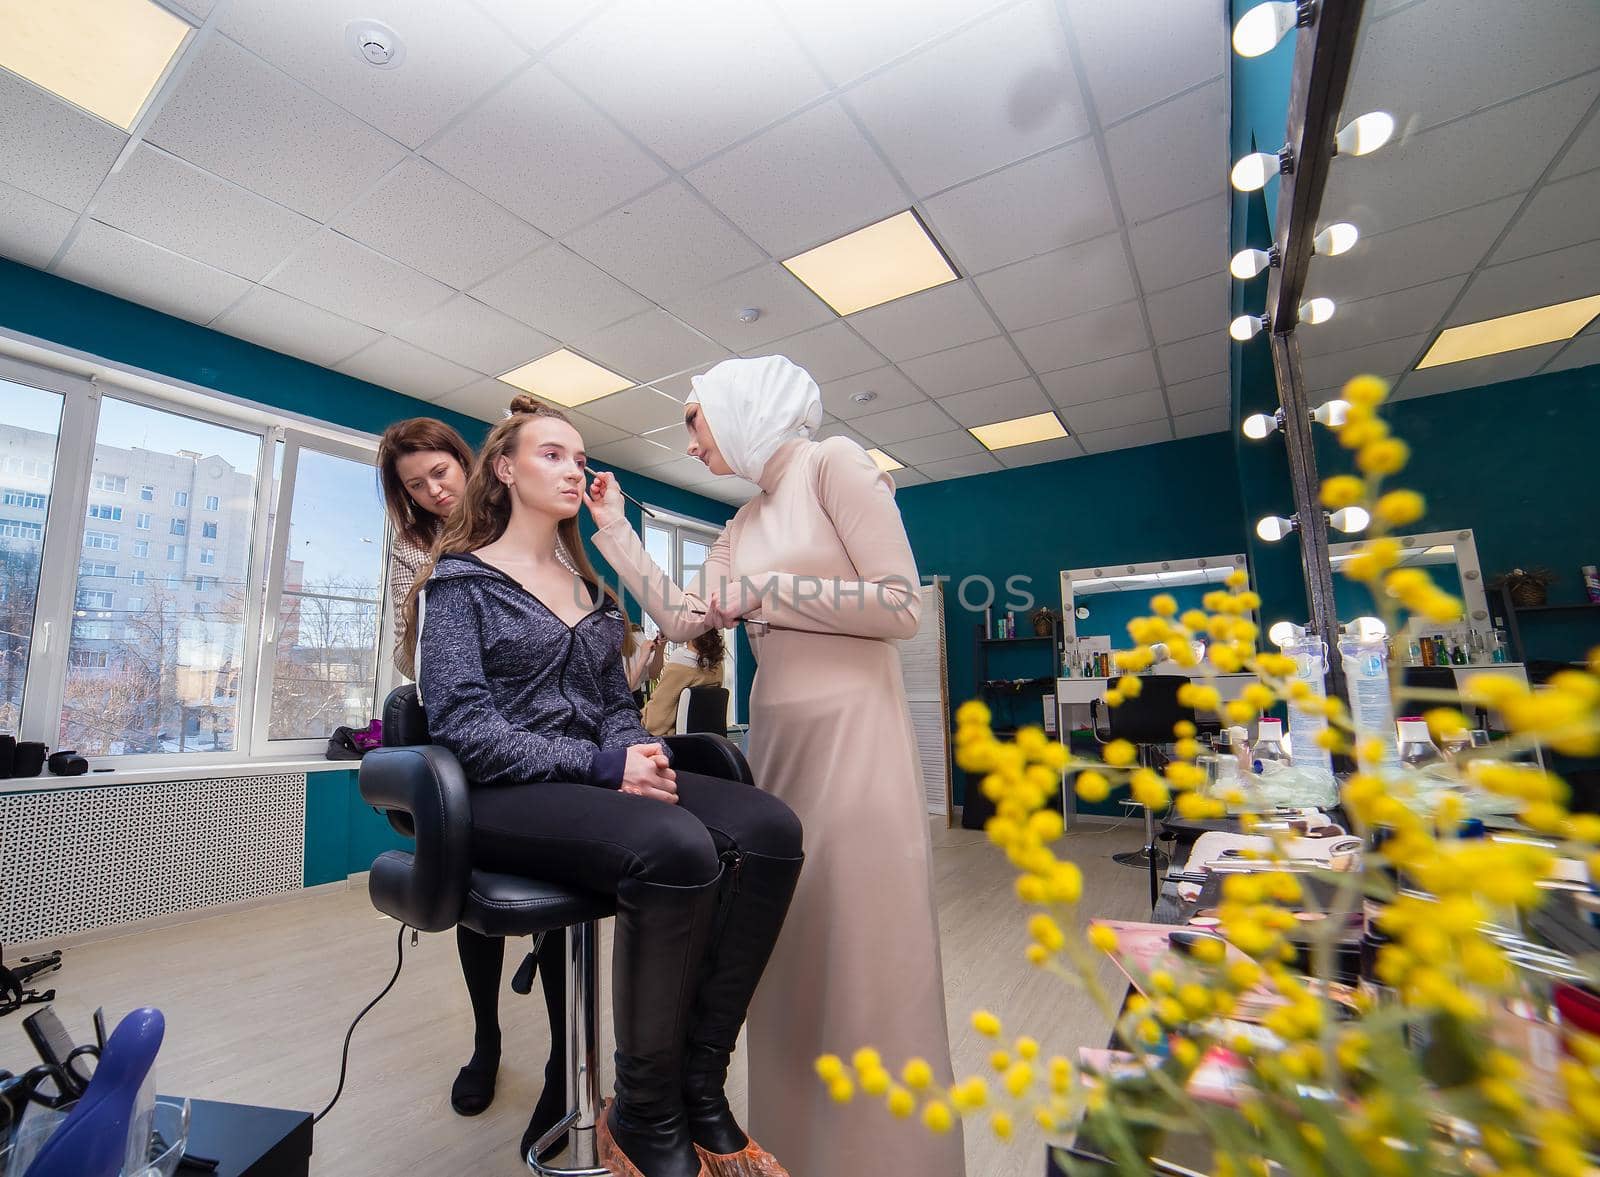 Two masters professionally style hair and make up a girl. Make-up artist and hairdresser create an image of a young woman. Business concept - beauty salon, facial skin and hair care.